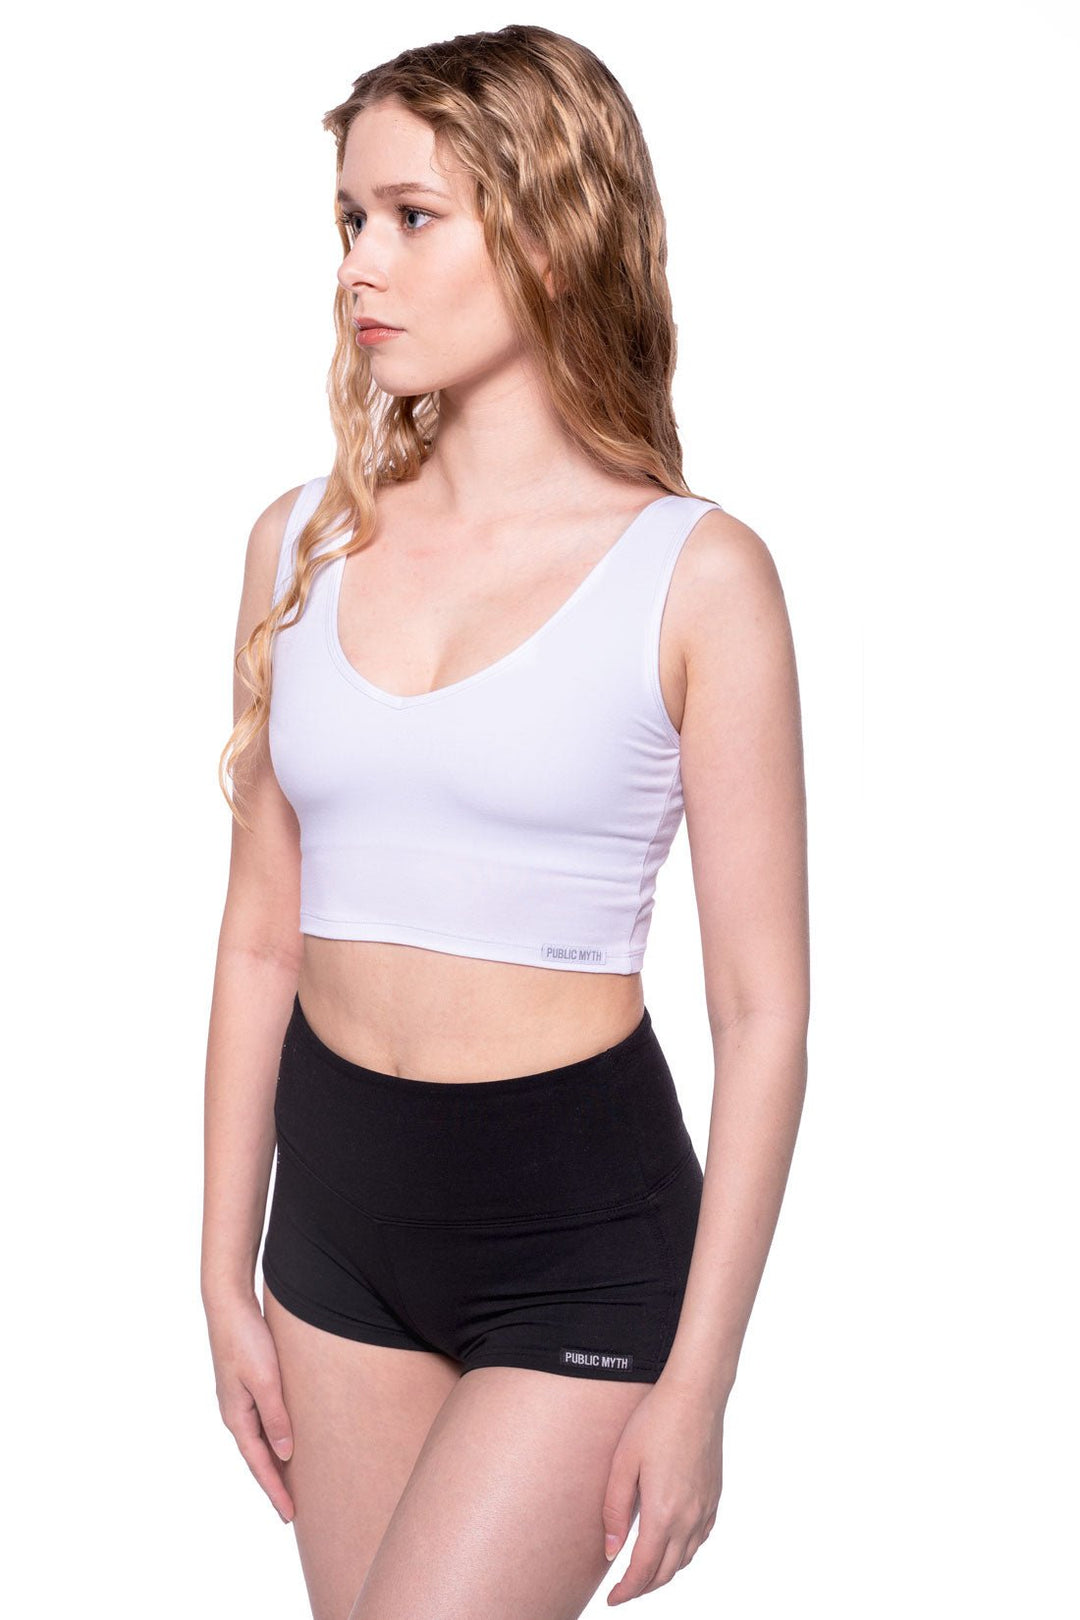 Yoga Tank Tops for Women with Built in Bra Workout Tops Yoga Shirts Athletic  Camisole Longline Sports Bra Tanks - China Yoga Shirt and Long Sleeve Yoga  Crop Tops price